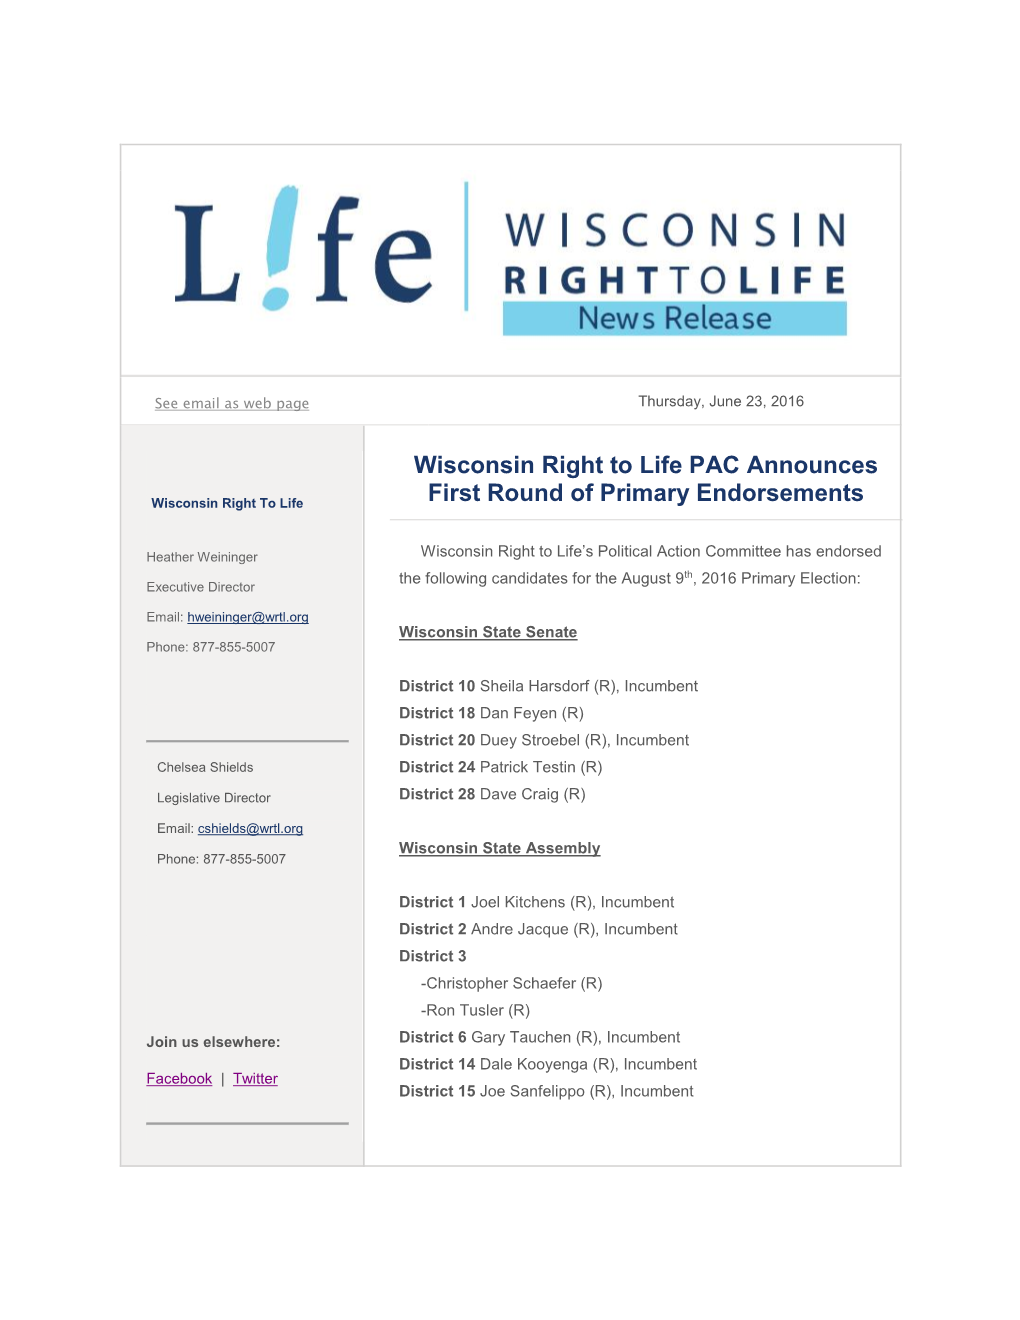 Wisconsin Right to Life PAC Announces First Round of Primary Endorsements